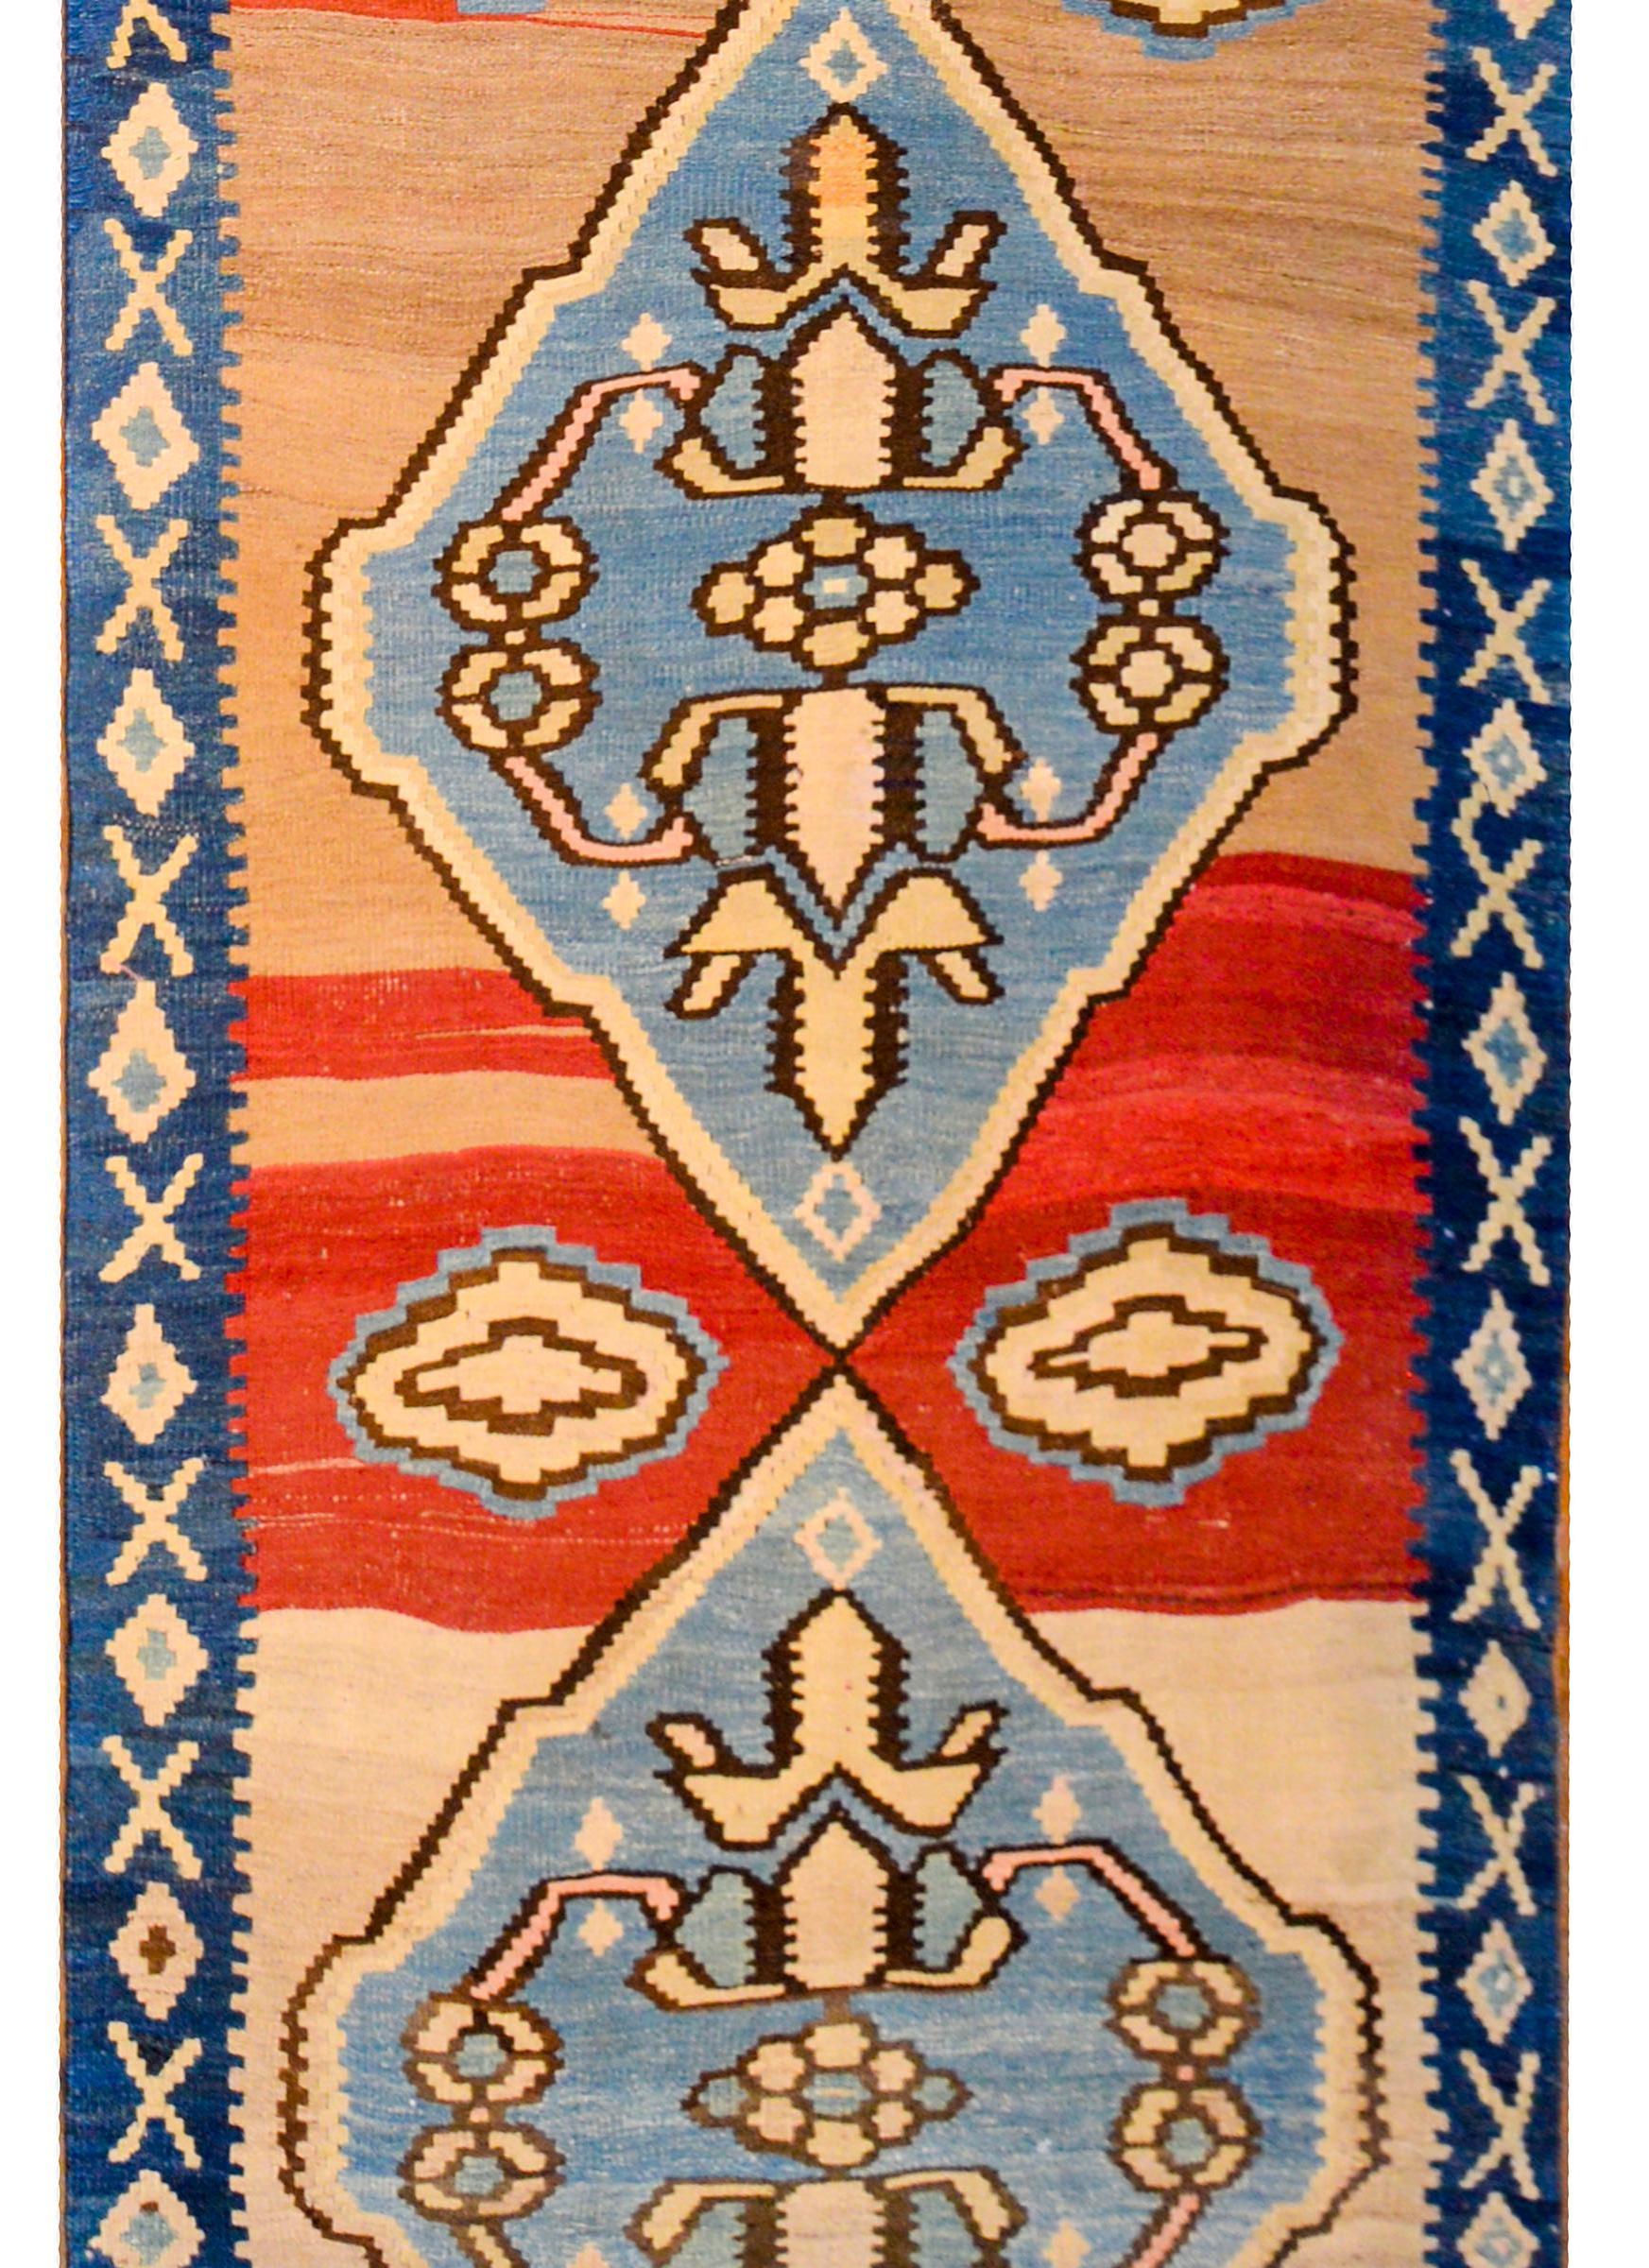 A bold early 20th century Azerbaijani Azari KIlim runner of considerable length with four large indigo diamond medallions with gold floral patterns on an abrash crimson and orange background. The border is simple with a petite geometric pattern in